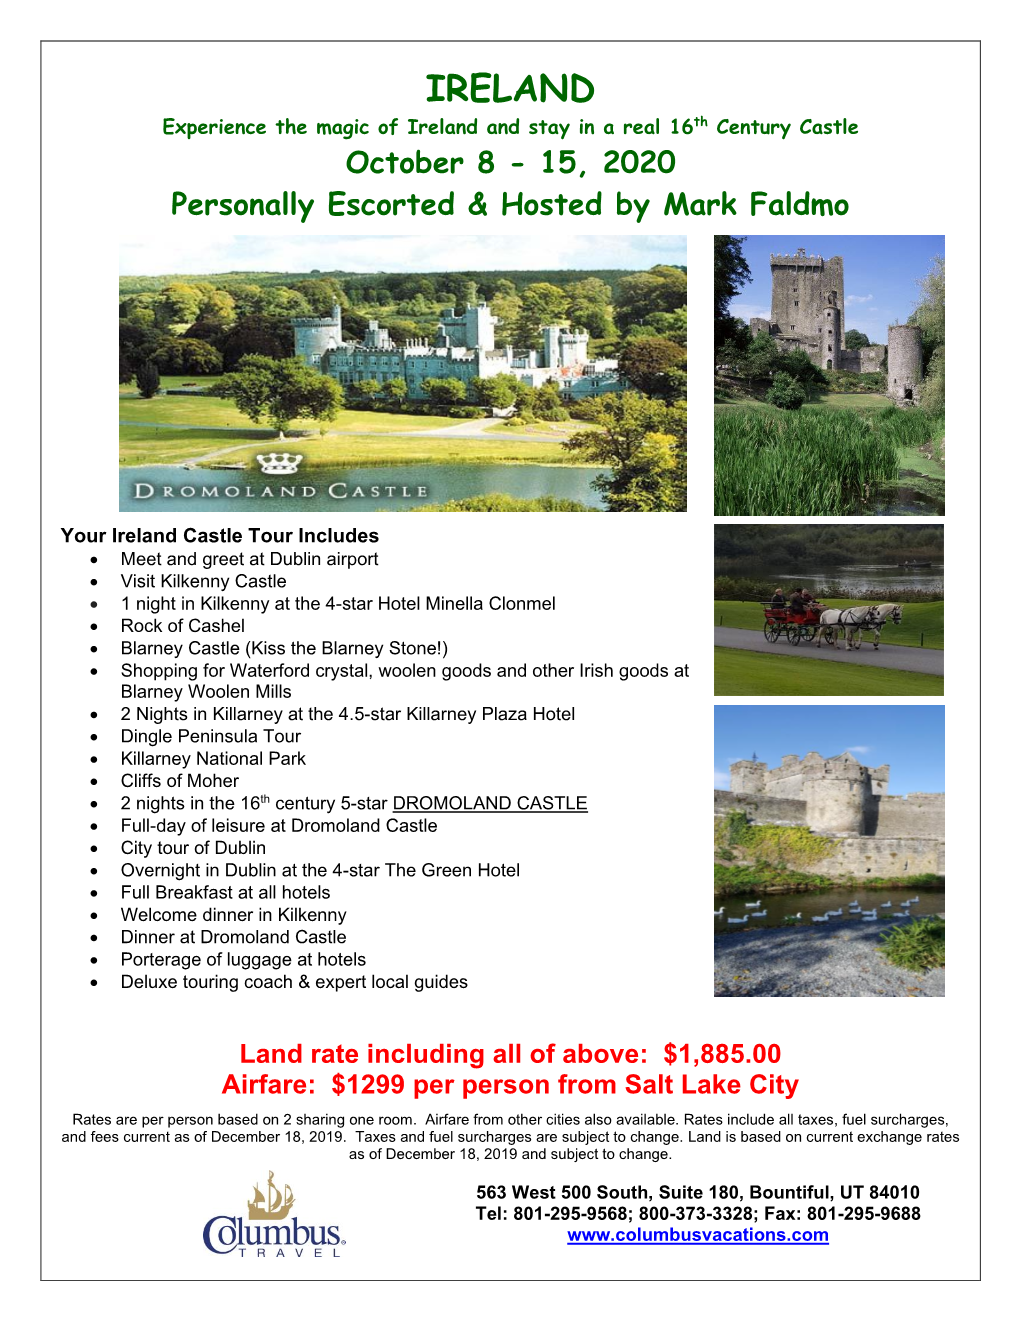 IRELAND Experience the Magic of Ireland and Stay in a Real 16Th Century Castle October 8 - 15, 2020 Personally Escorted & Hosted by Mark Faldmo